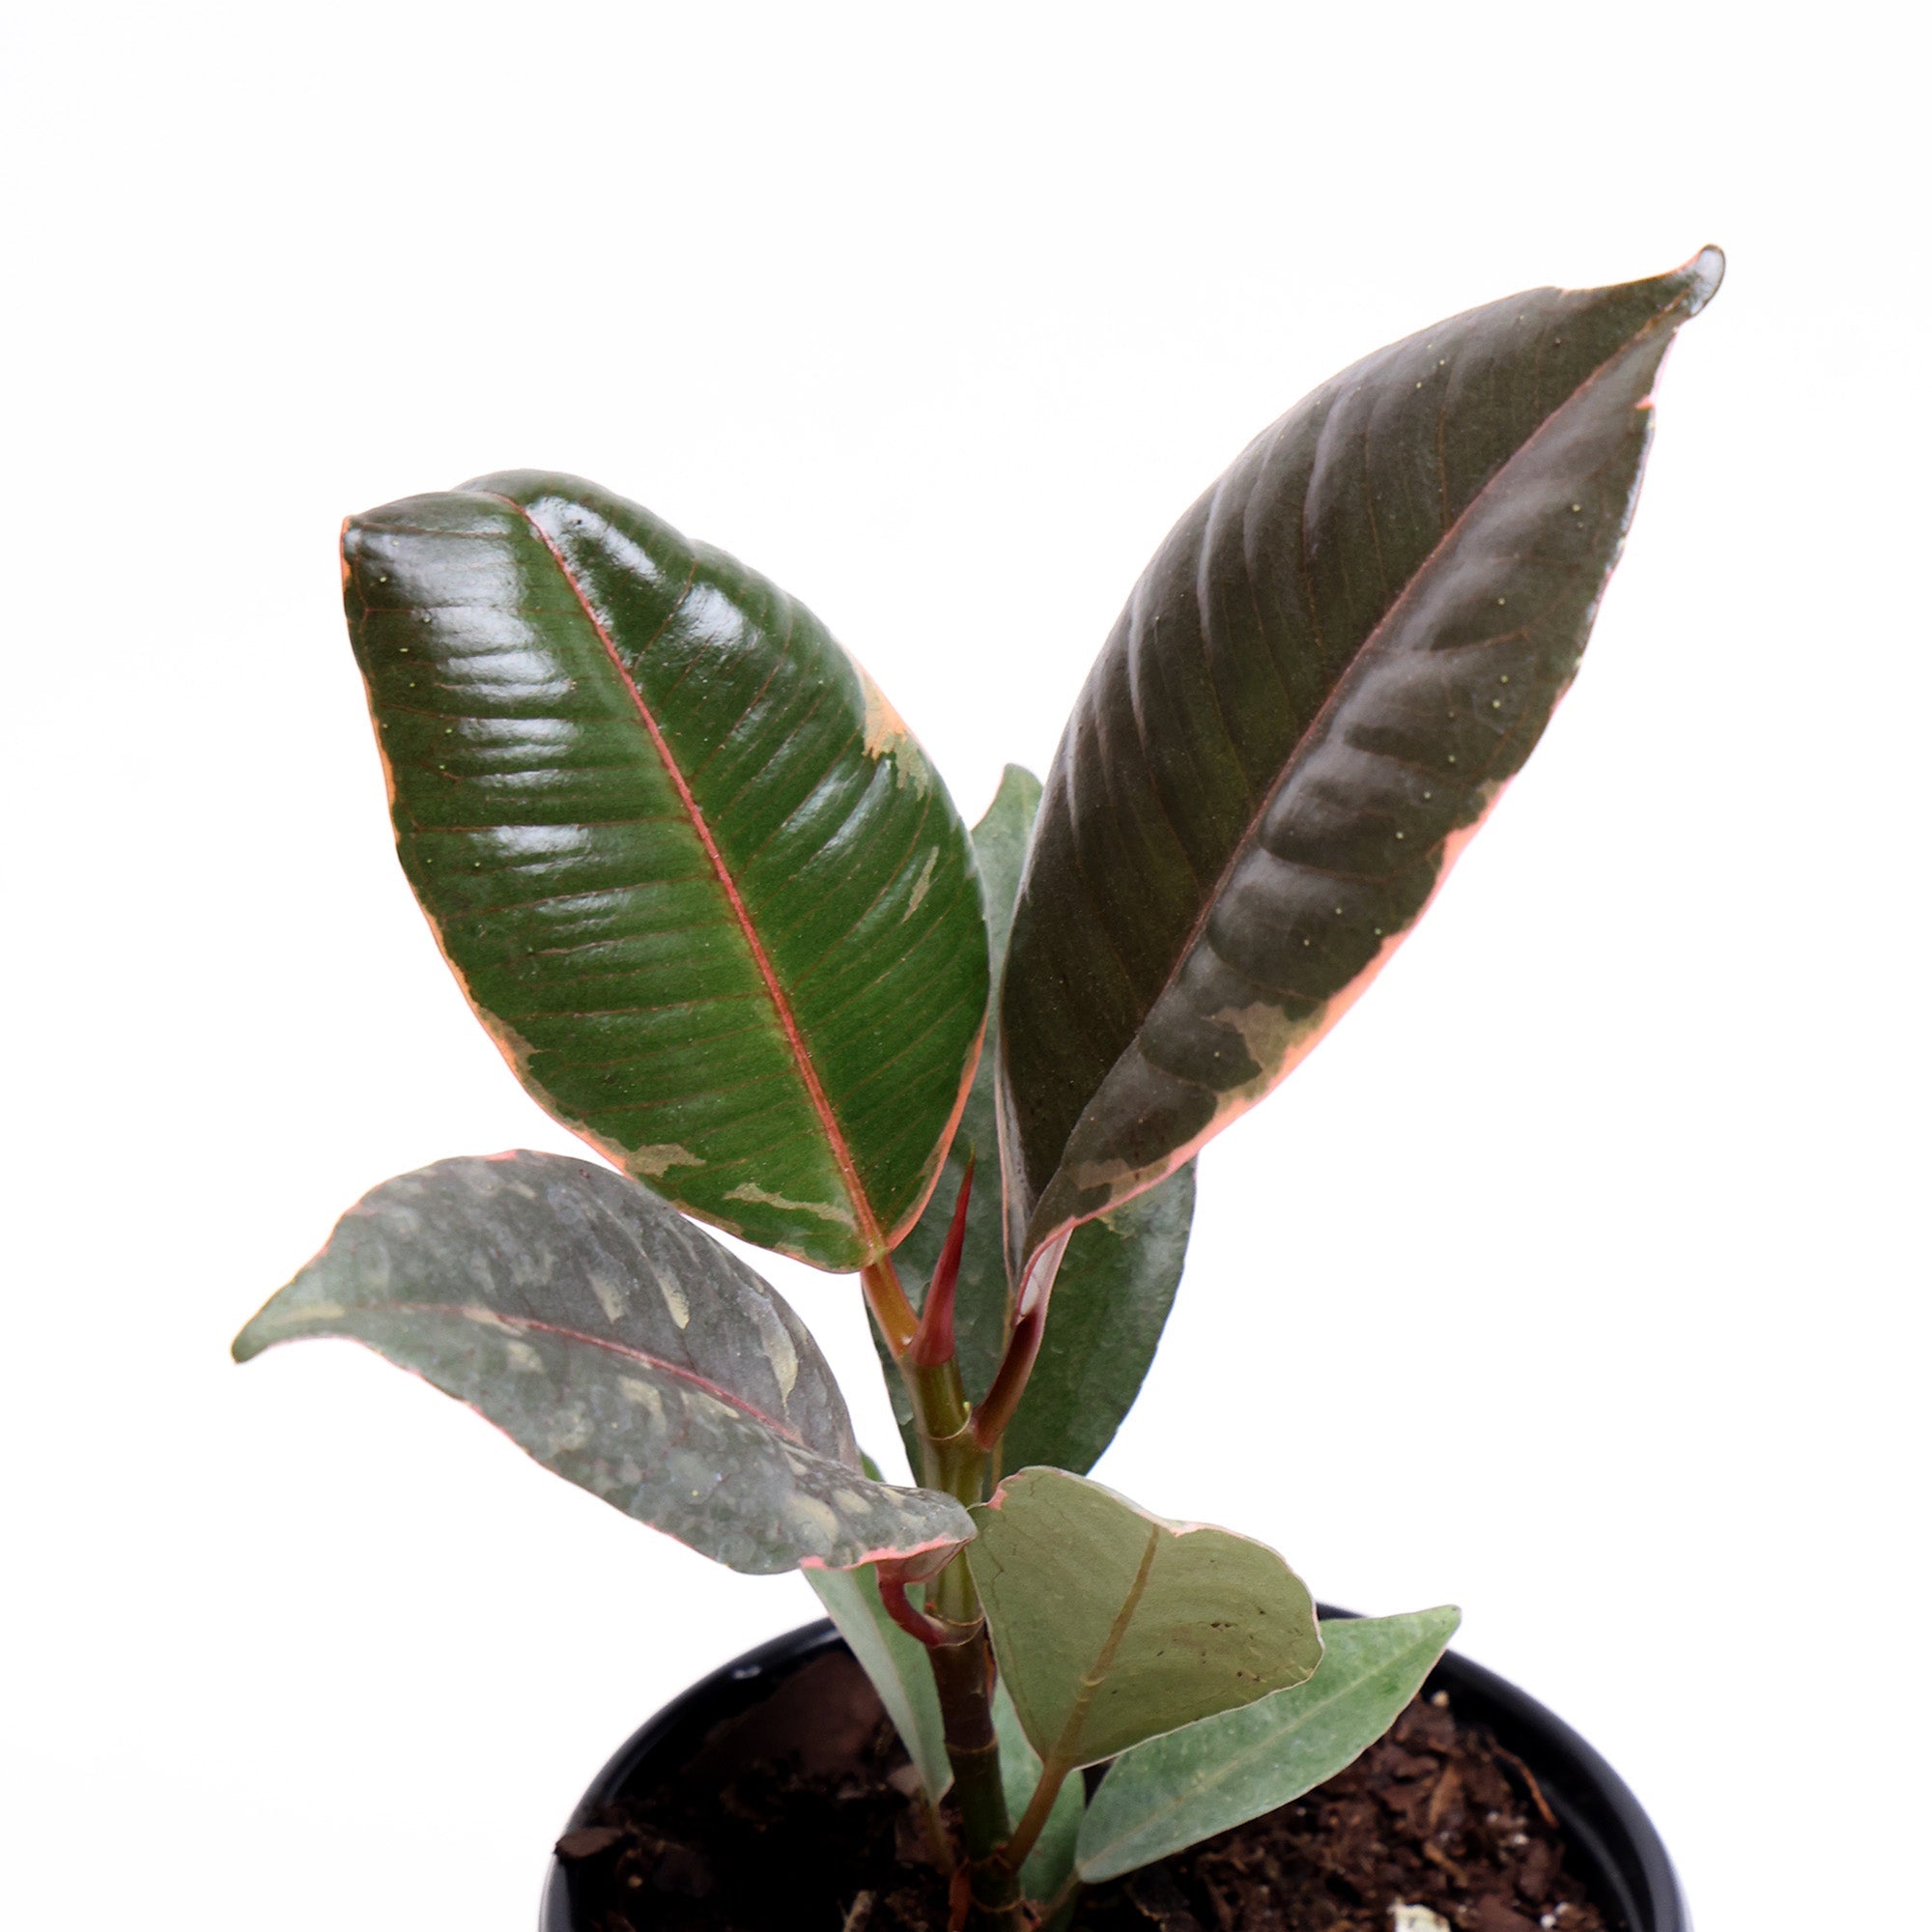 A Ficus Ruby 4 Inch plant with glossy green leaves in a small grower pot, isolated on a white background by Chive Studio.